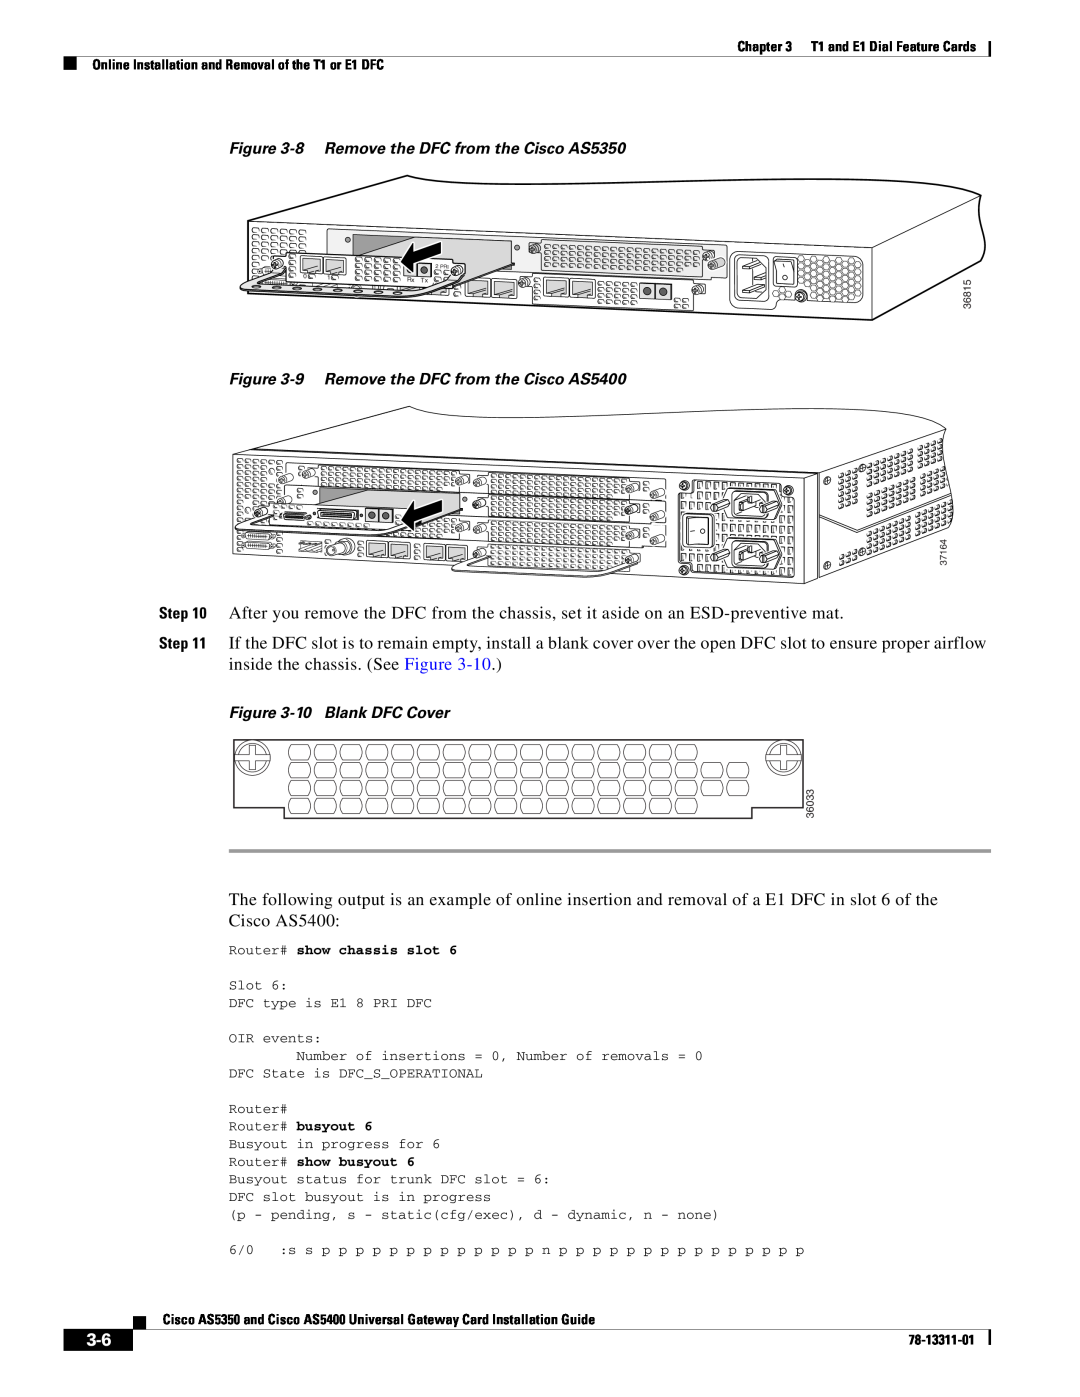 Cisco Systems manual 8 Remove the DFC from the Cisco AS5350, 9 Remove the DFC from the Cisco AS5400, 10 Blank DFC Cover 